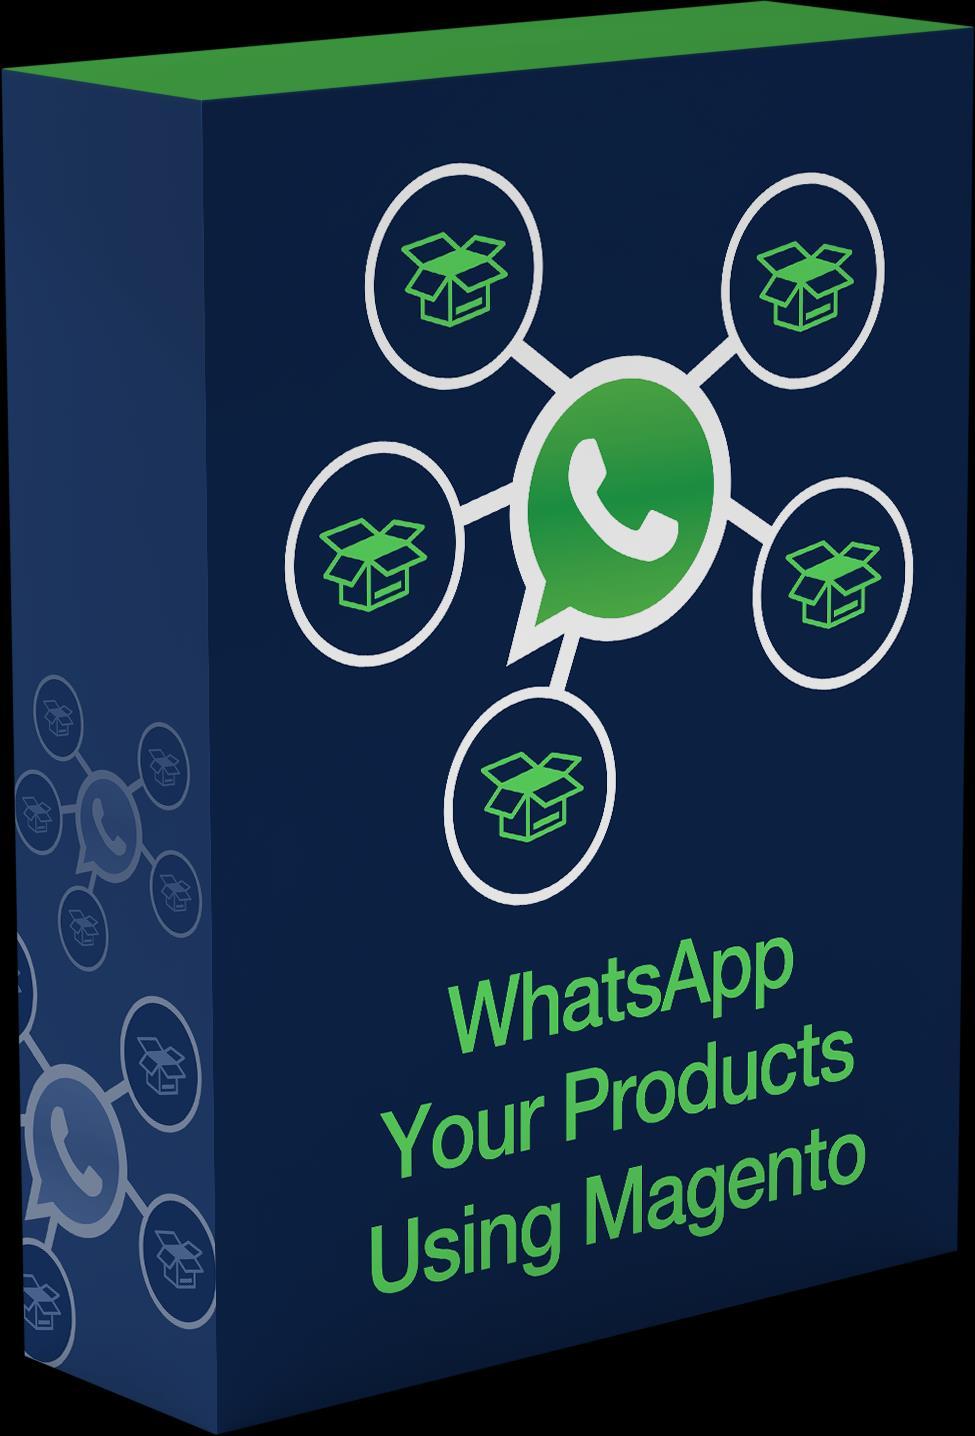 WHATSAPP YOUR PRODUCTS